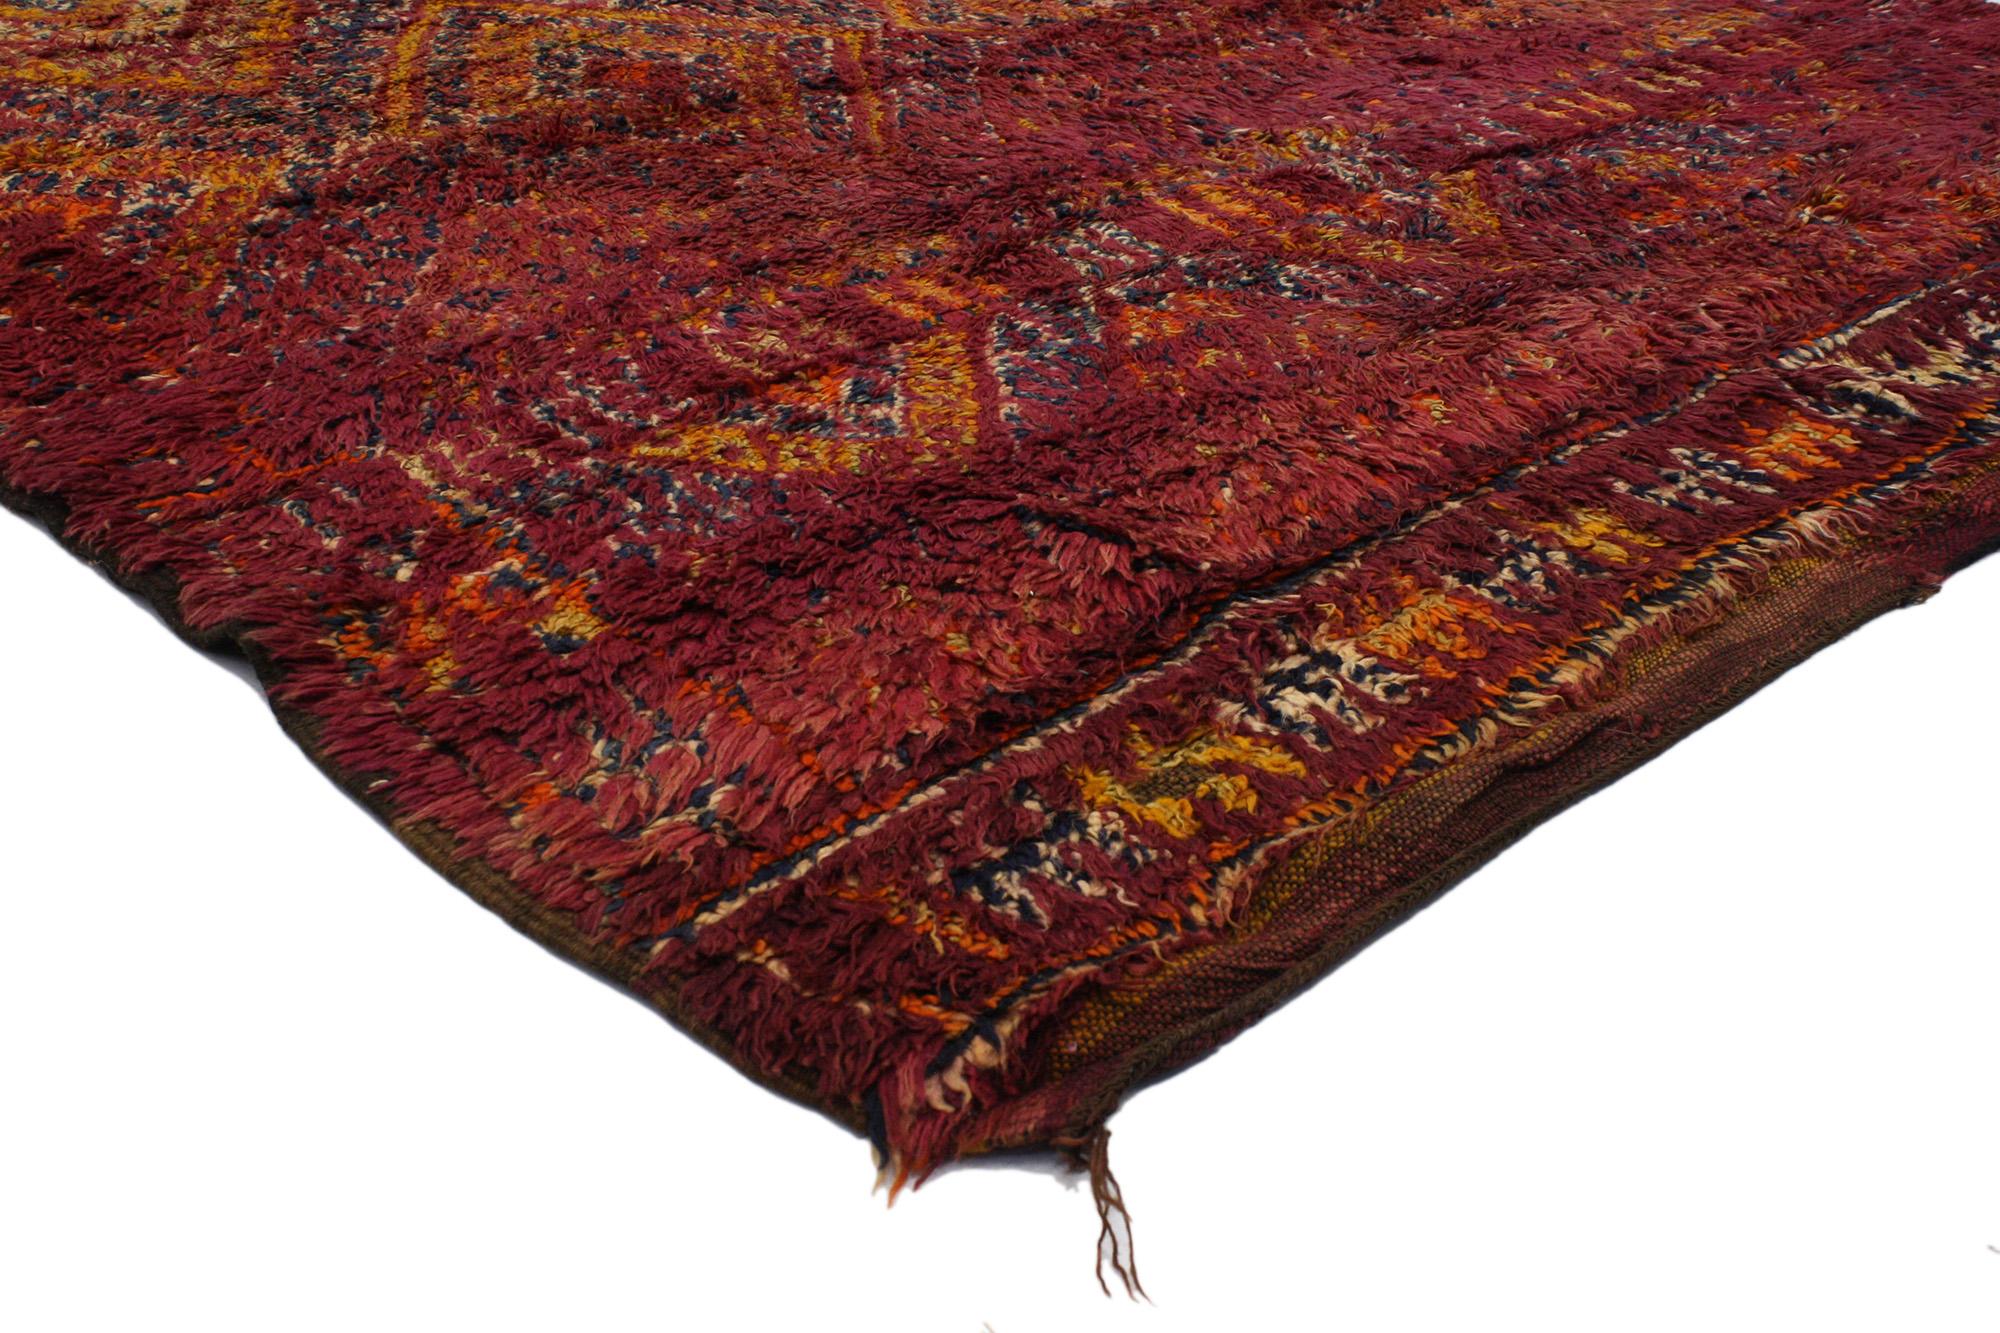 20158 Vintage Beni MGuild Moroccan Rug, 05'09 X 09'10. Imbued with a delightful bohemian flair and an infectious vitality, this hand-knotted wool vintage Beni M'Guild Moroccan rug envelops a room in a kaleidoscope of raspberry hues adorned with